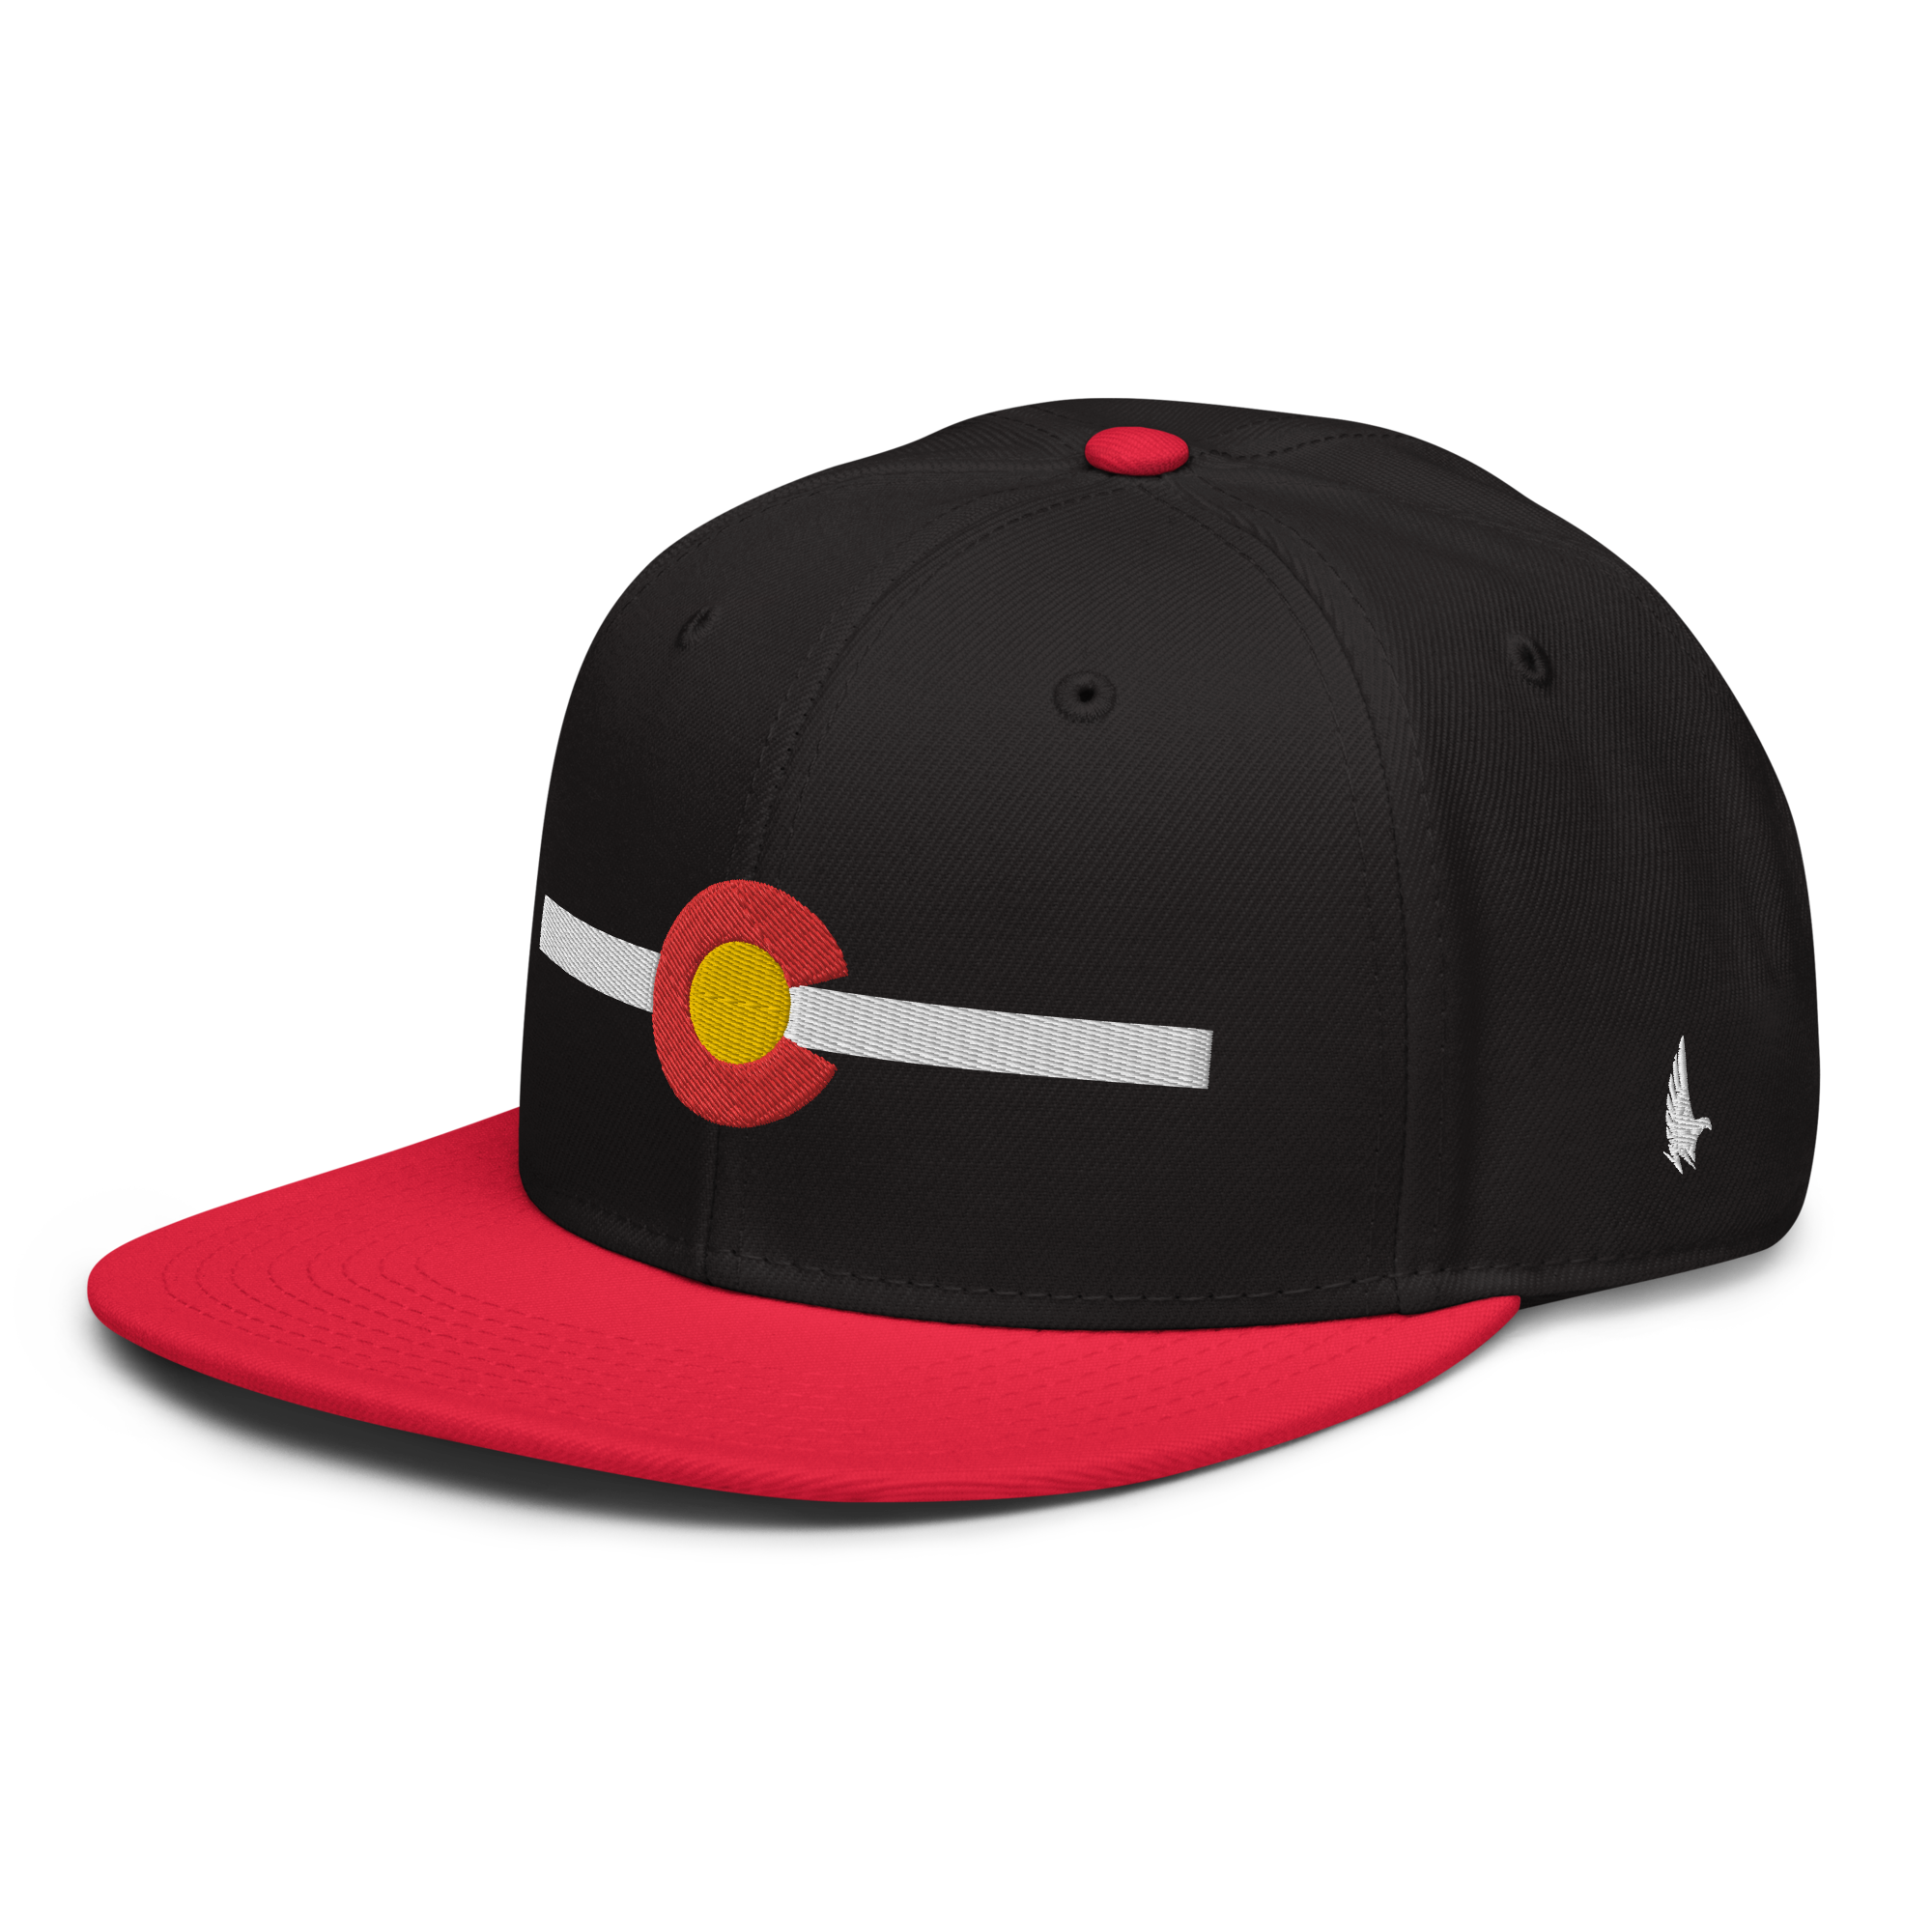 Classic Colorado Snapback Hat Black White Red OS - Loyalty Vibes